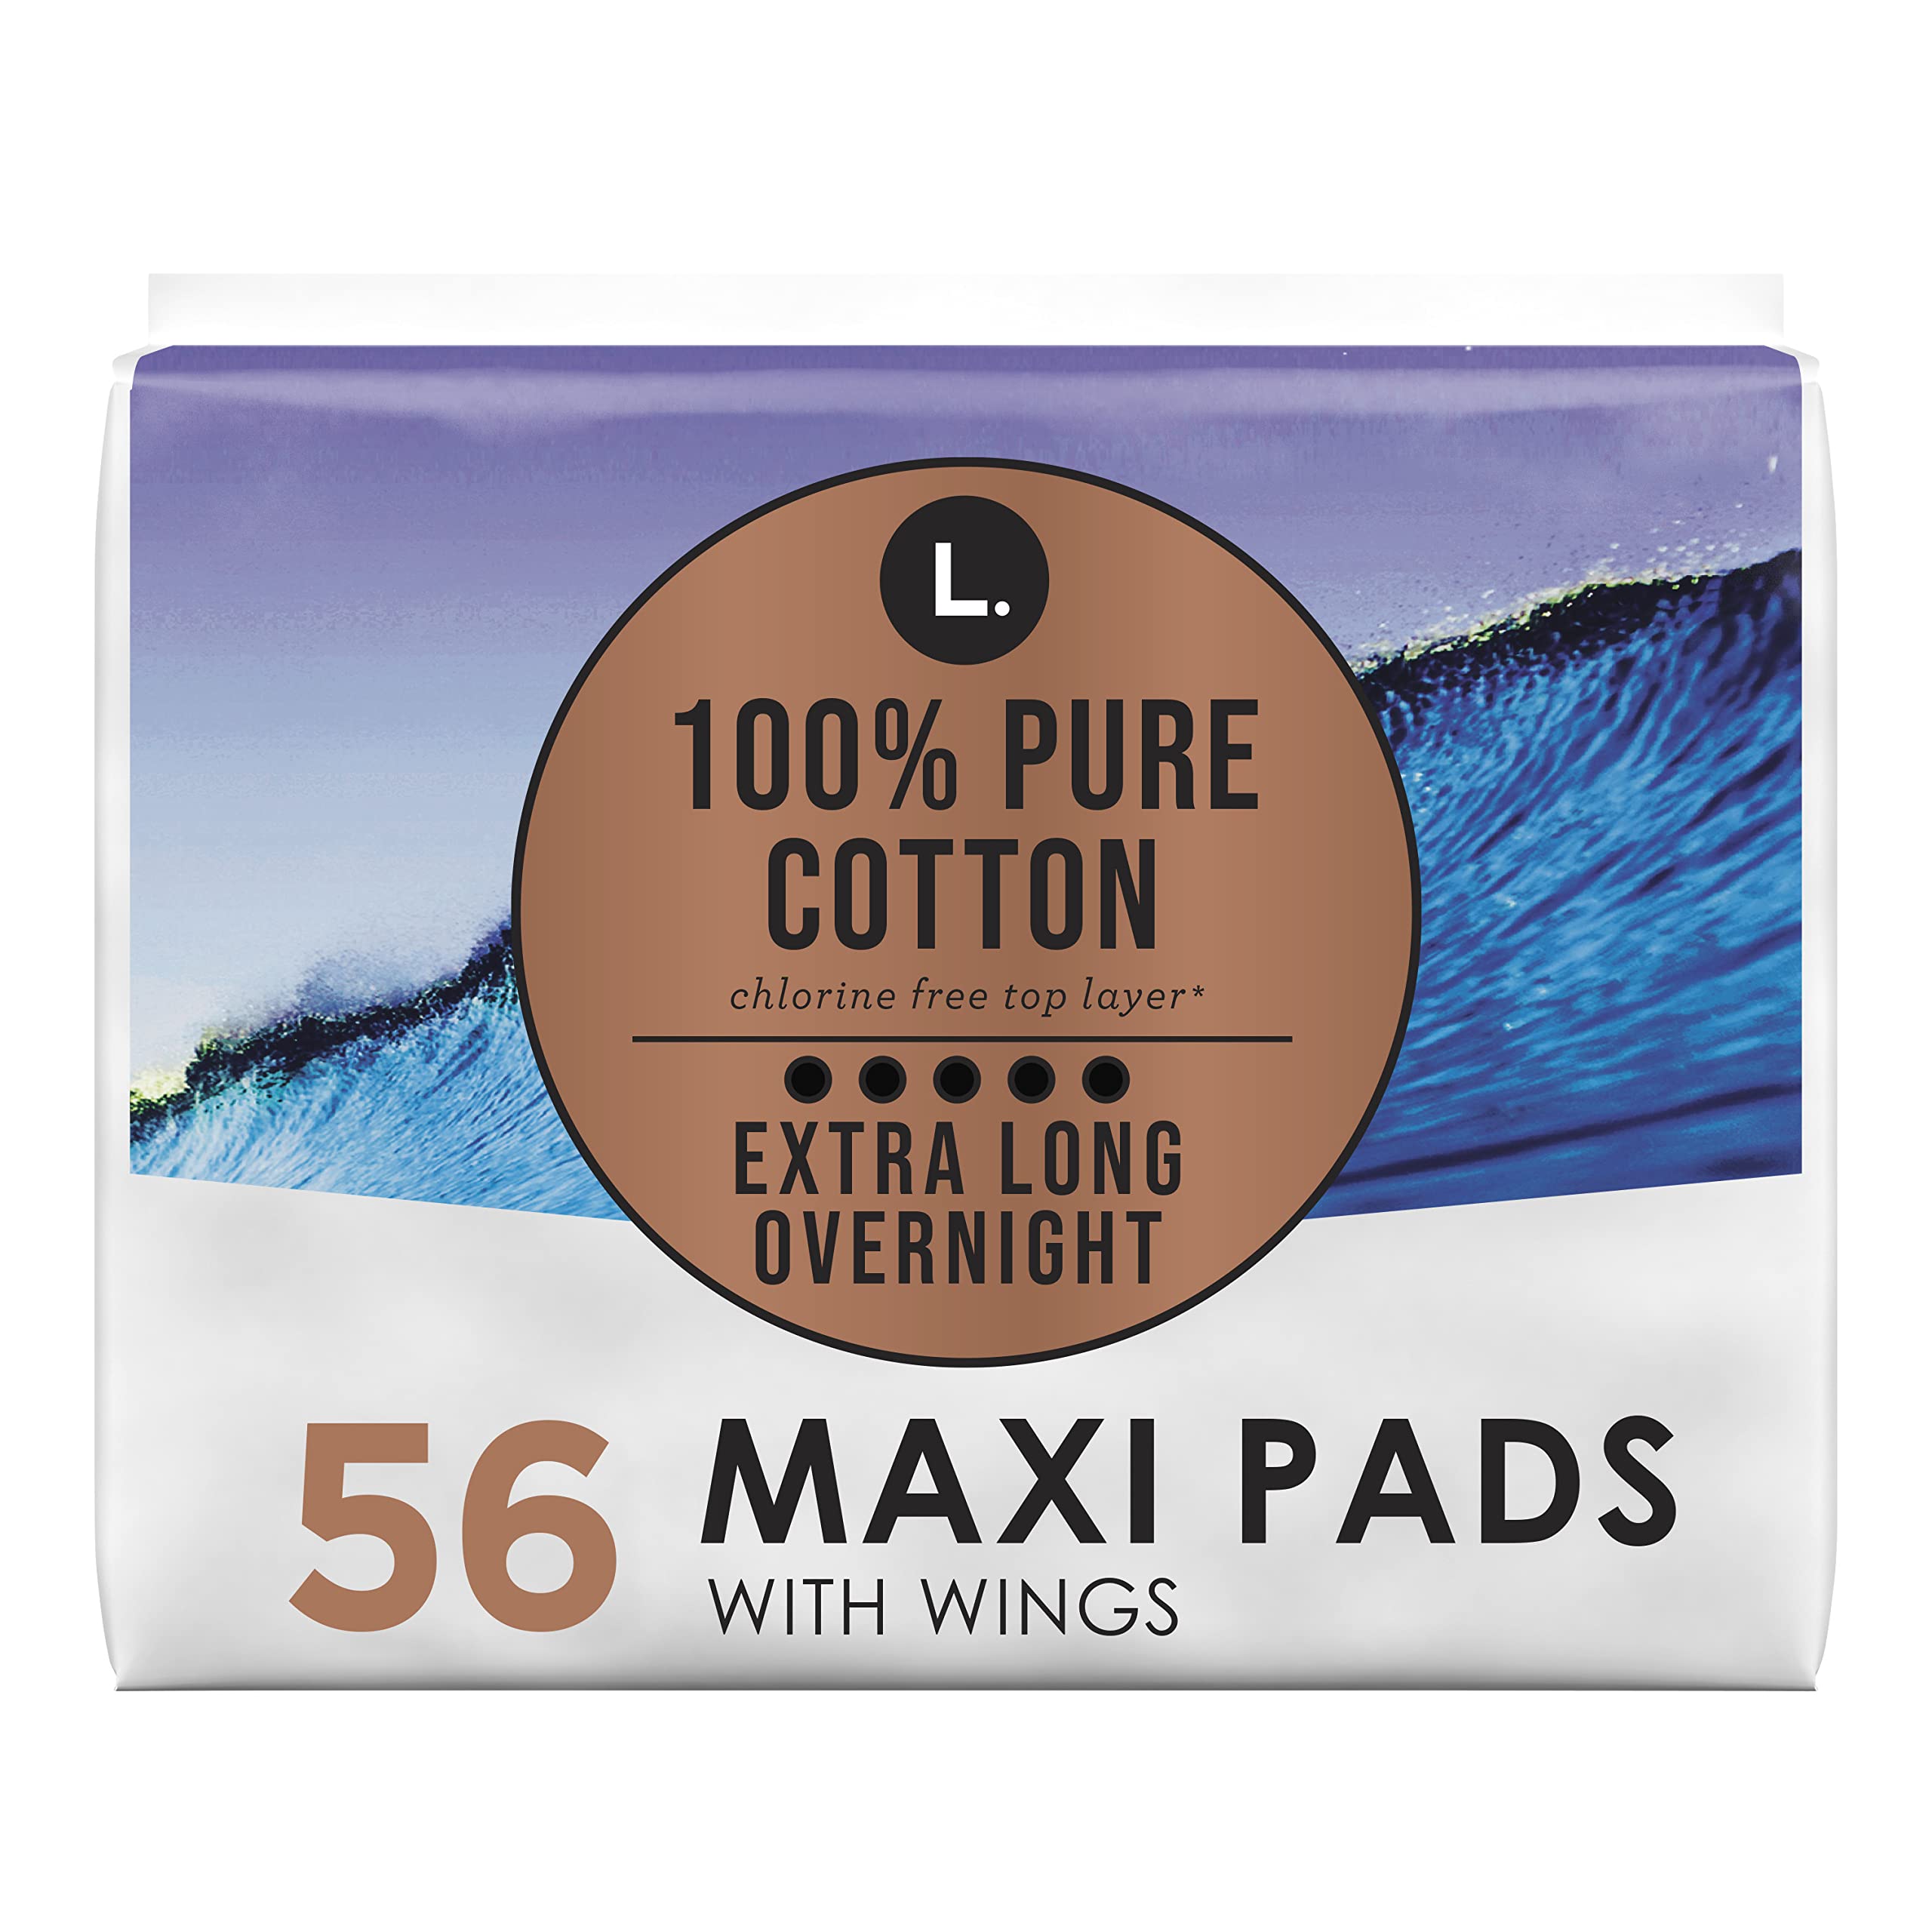 L. Organic Cotton Topsheet Extra Long Overnight Pads - 28 Count x 2 Packs (56 Count Total)